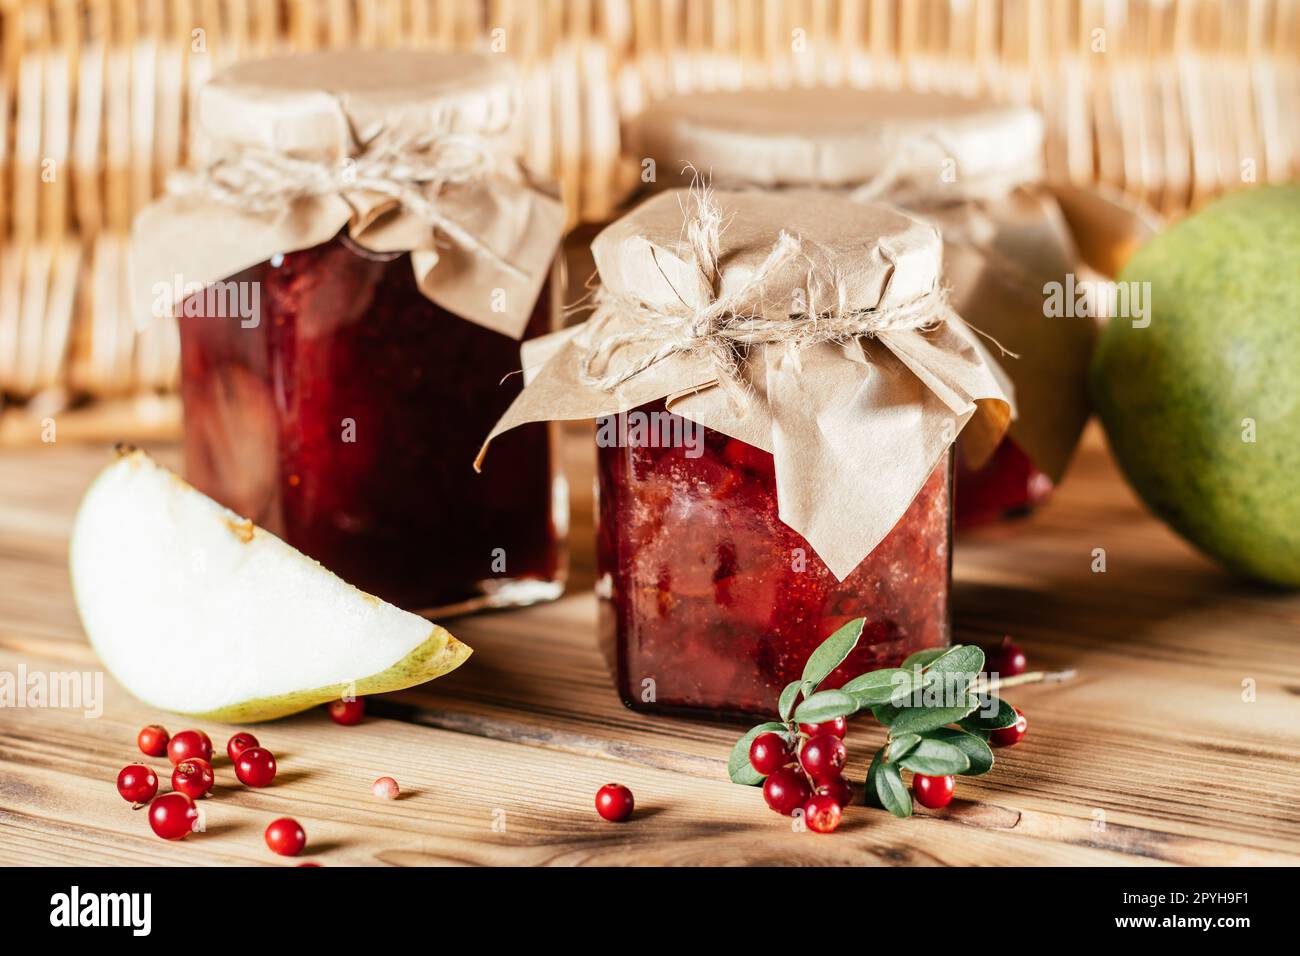 Jars of homemade lingonberry and pear jam with craft paper on lids on wooden table next to fresh lingonberries and pears Stock Photo